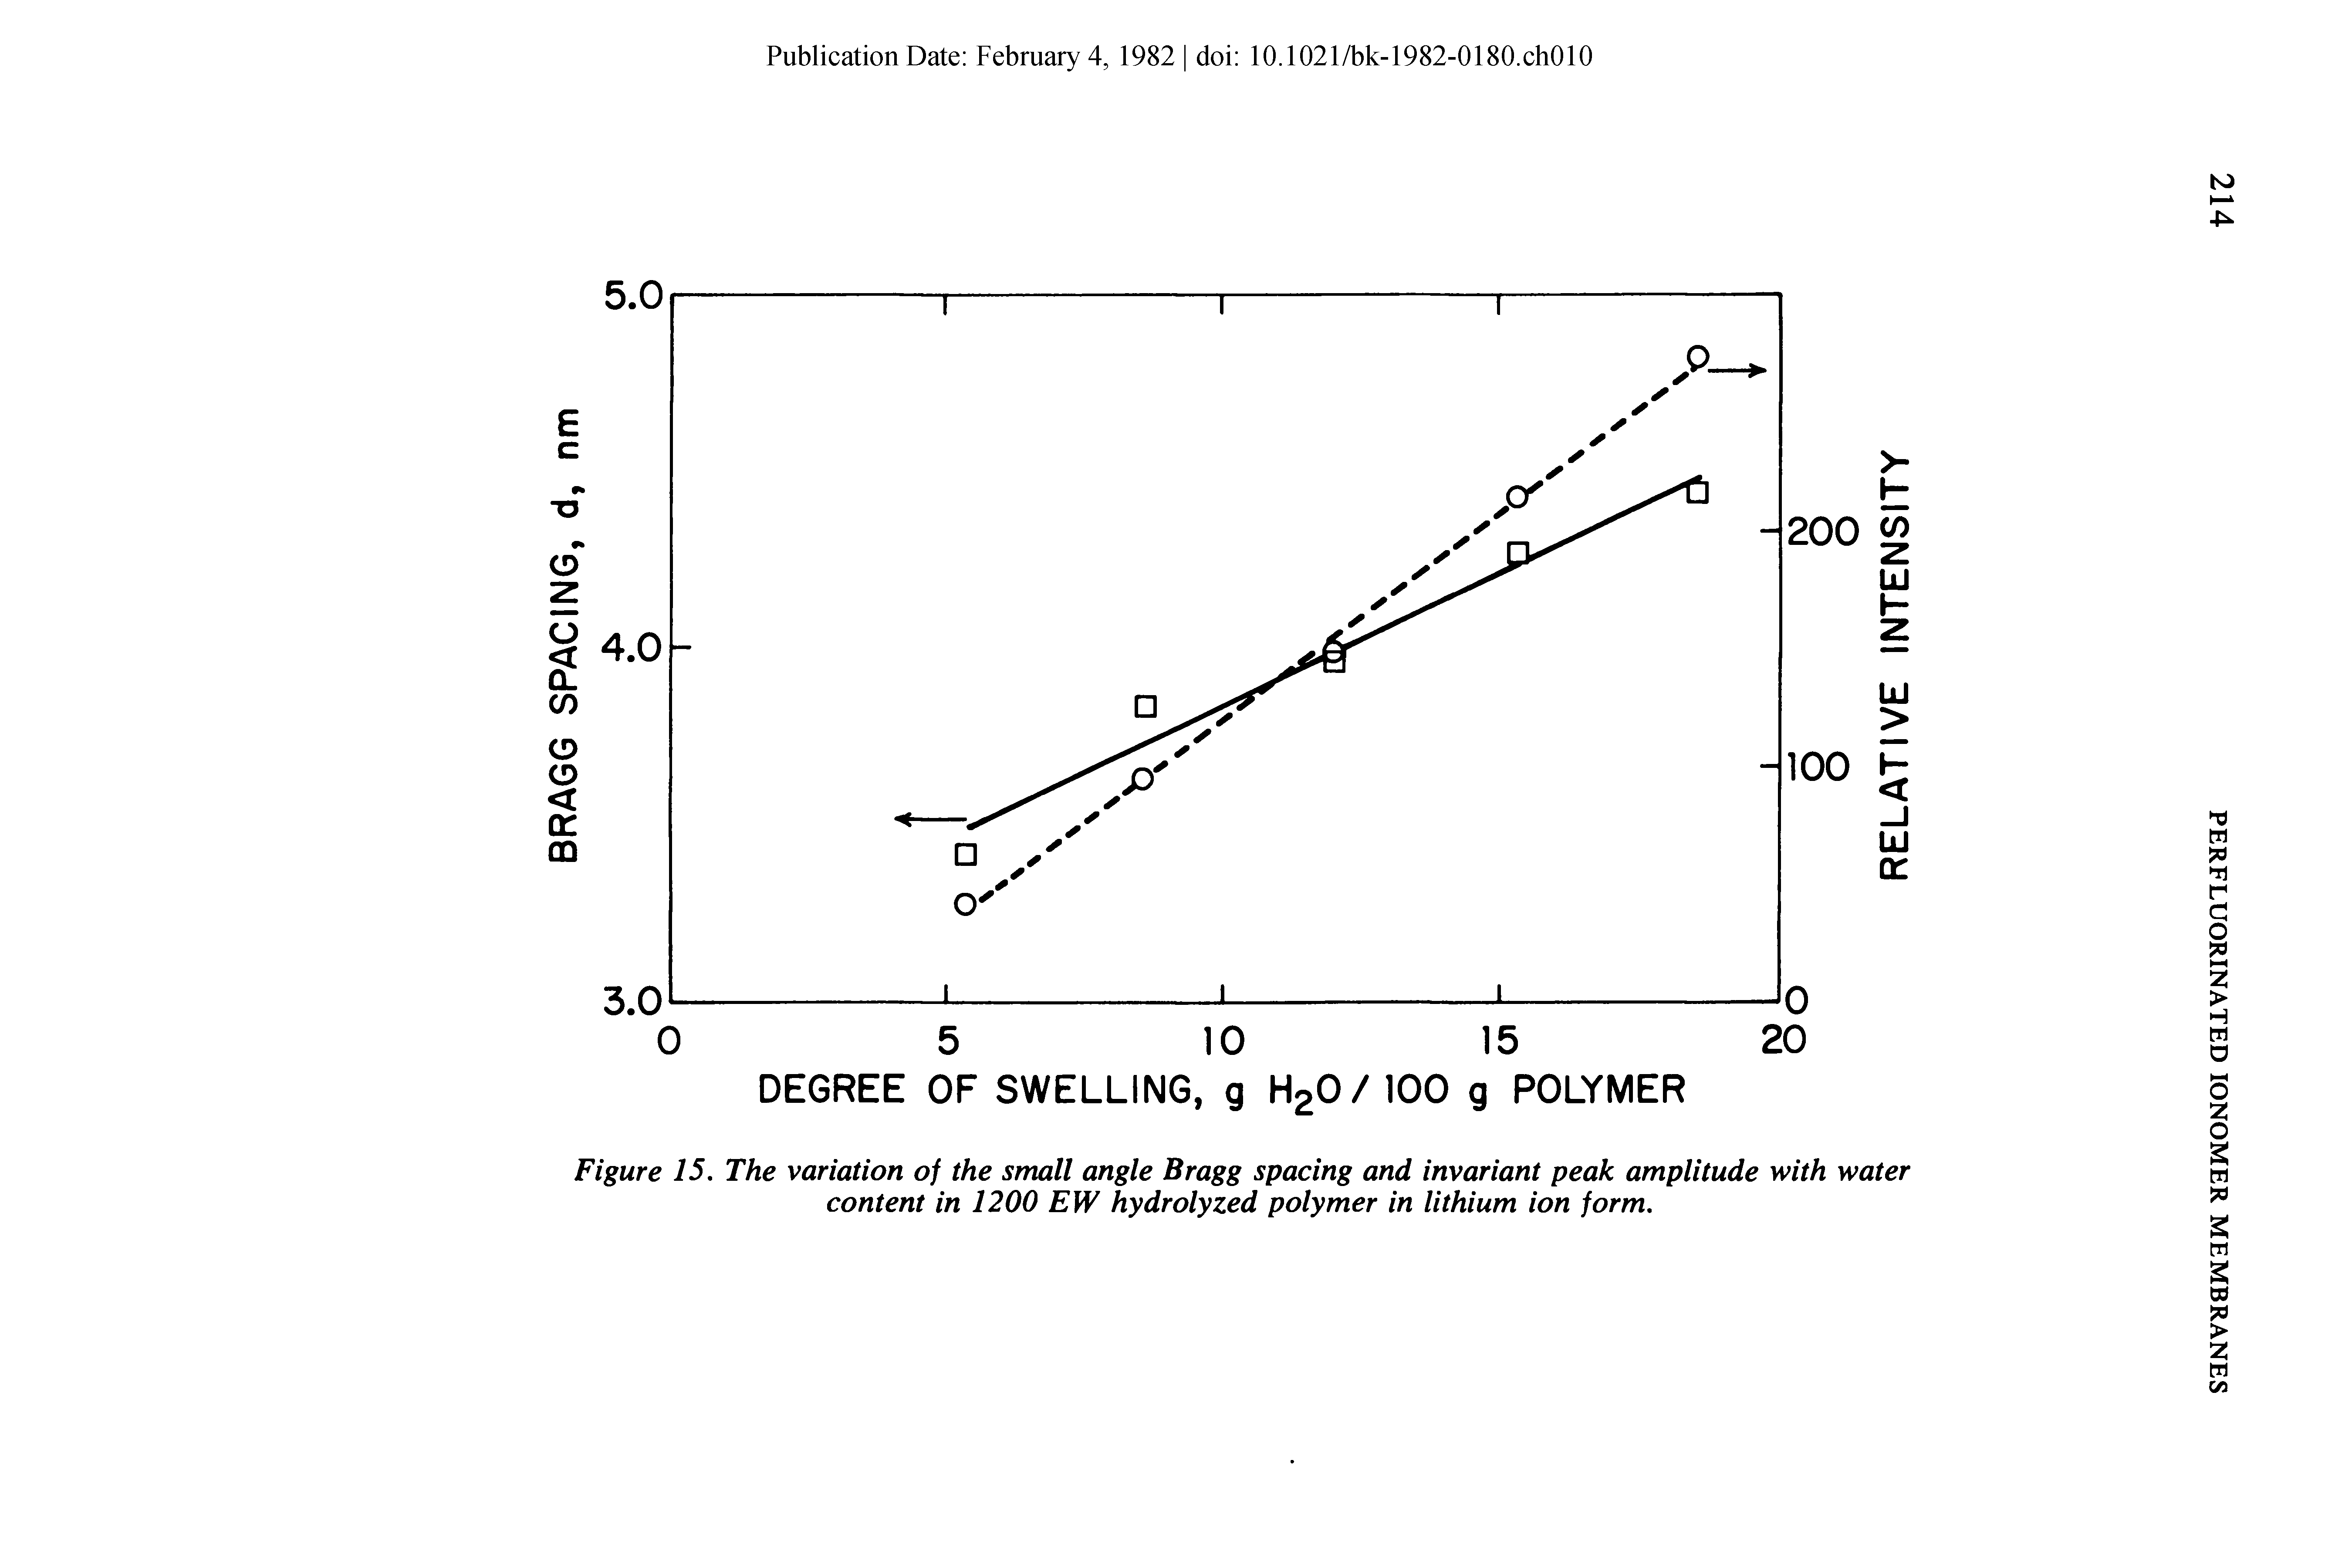 Figure 15. The variation of the small angle Bragg spacing and invariant peak amplitude with water content in 1200 EW hydrolyzed polymer in lithium ion form.